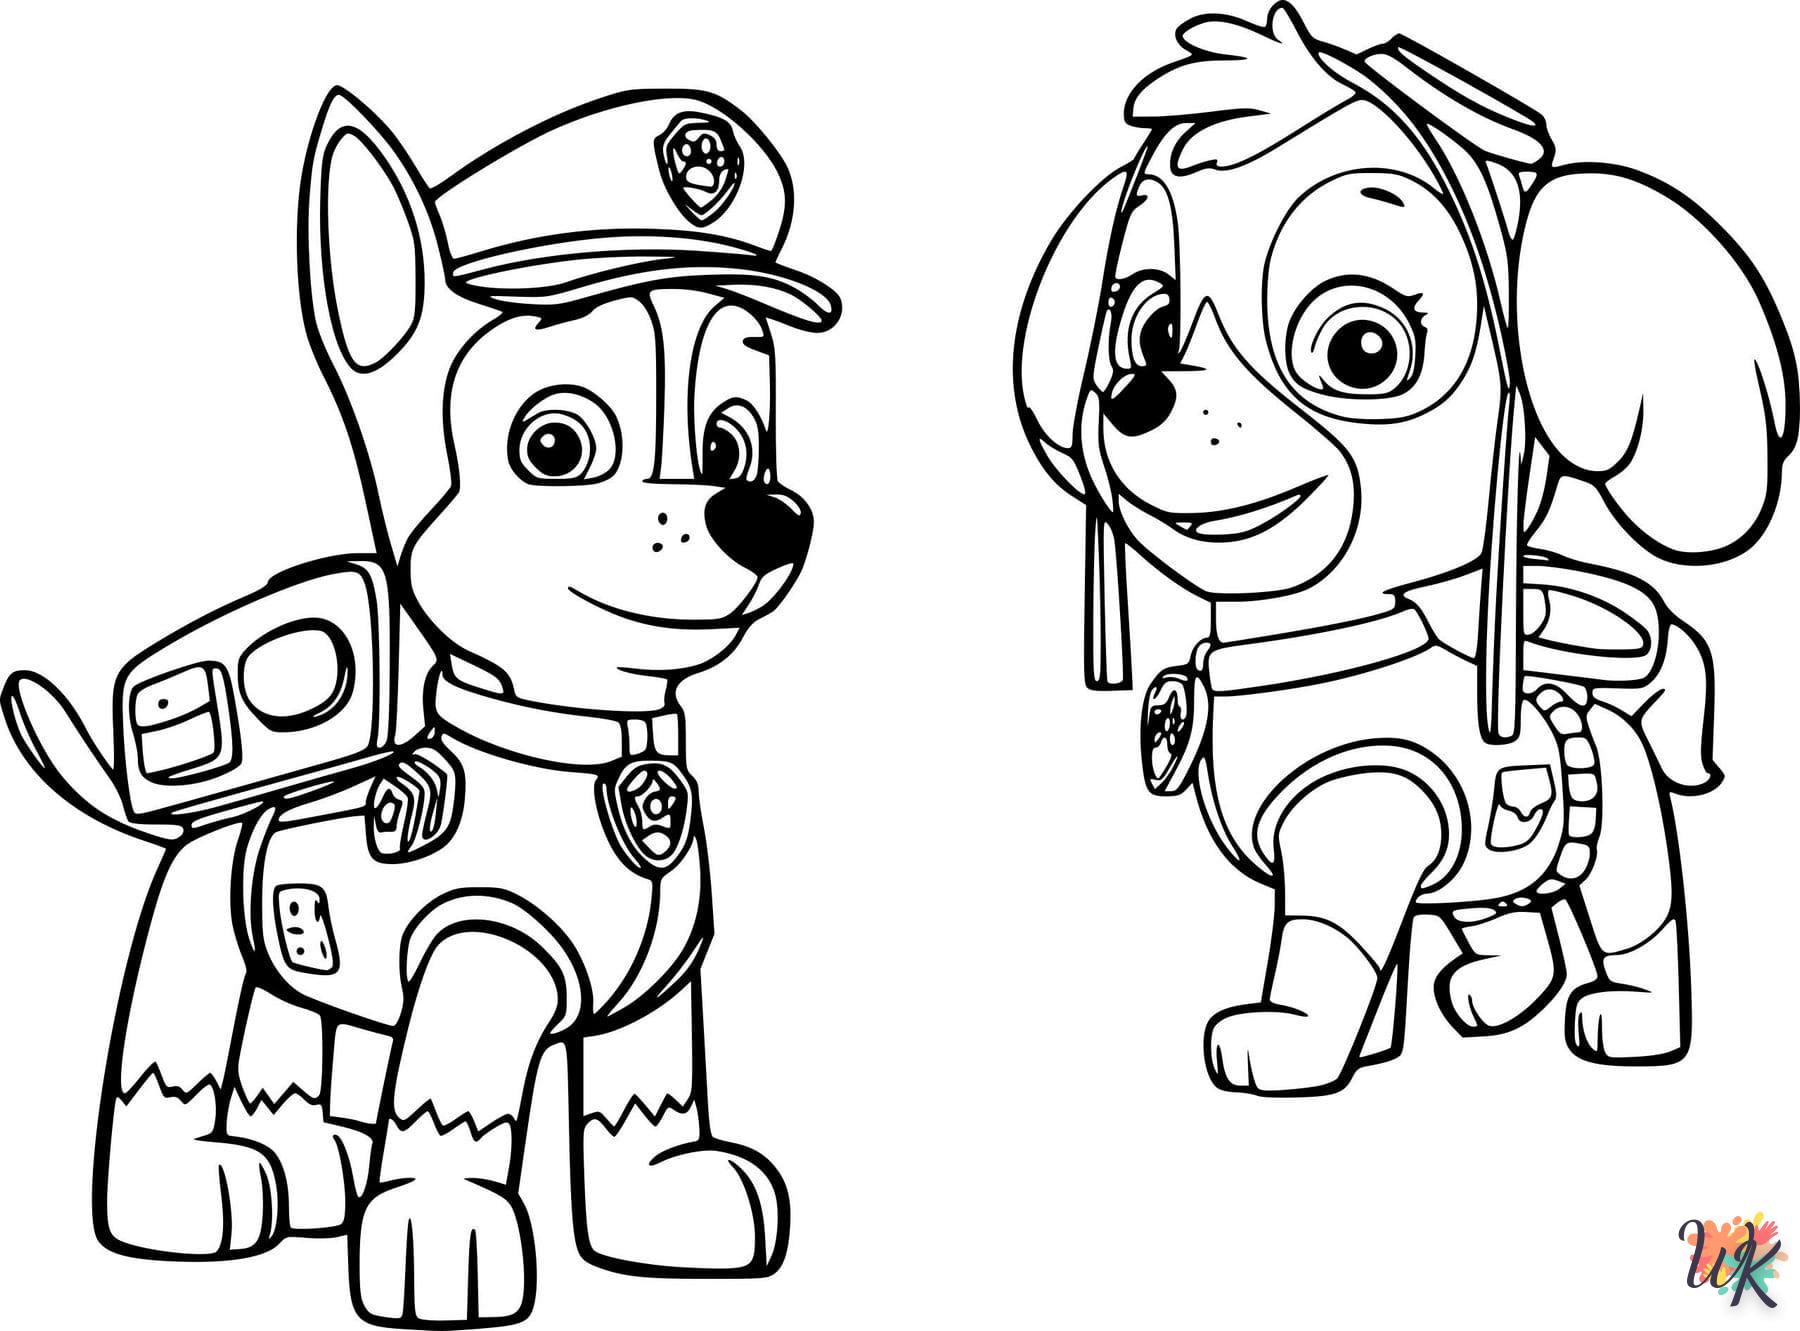 Paw Patrol coloring page for children to print